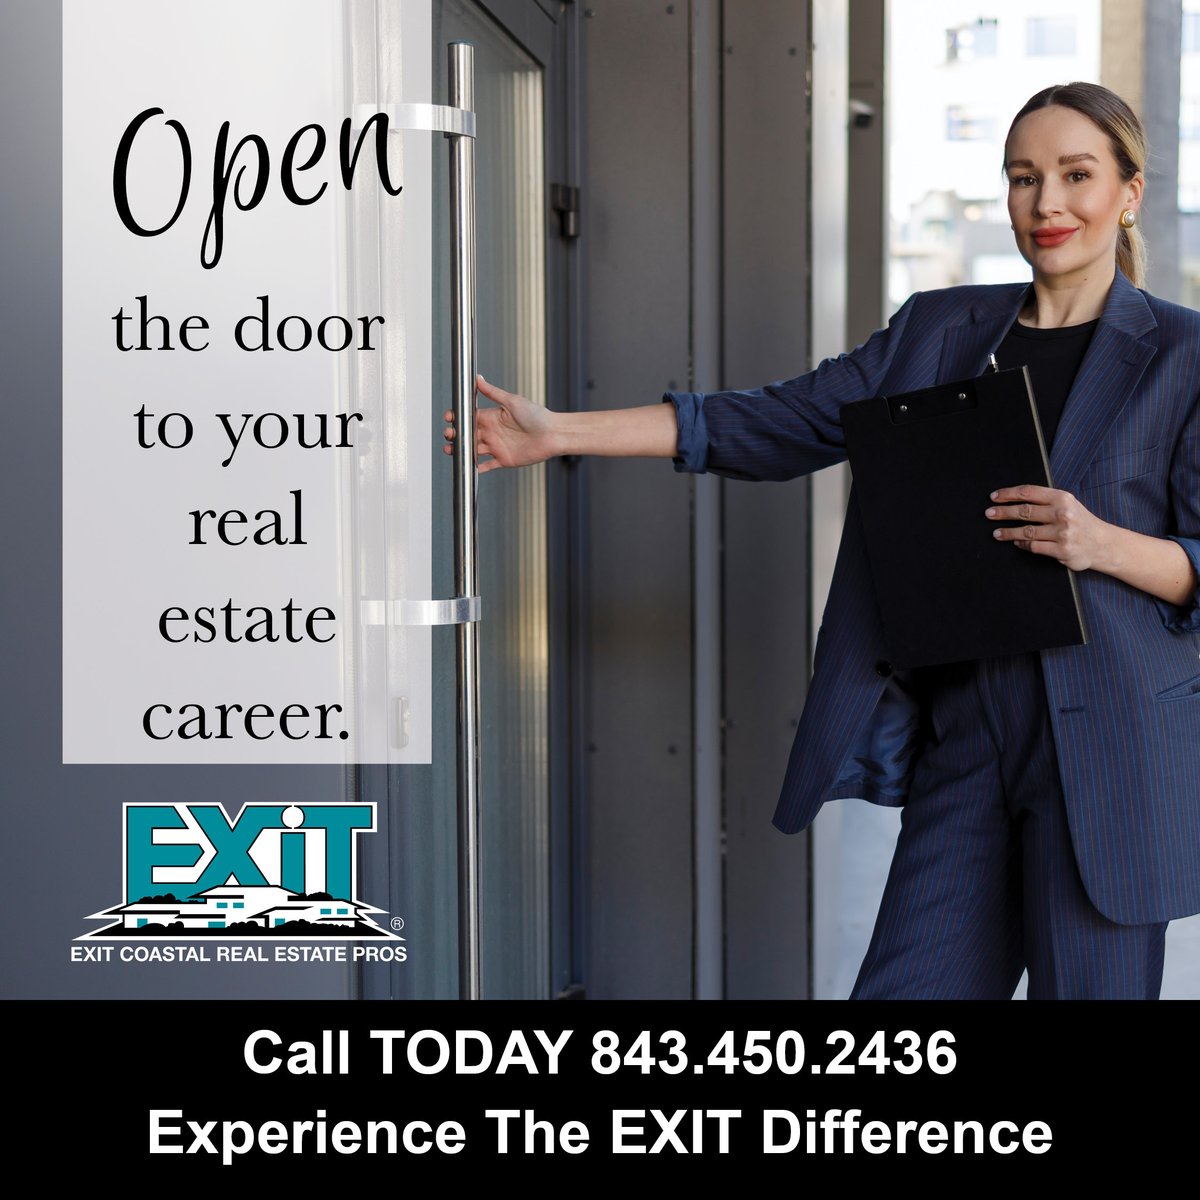 Open the door to your real estate career with EXIT Coastal Real Estate Pros!

#EXITCoastalRealEstatePros #EXITRealEstate #SCHomes #RealEstate #SoldWithStyle #HomeBuyingMadeEasy #EXITRealty #EXITCRP #MyrtleBeachRealEstate #EXITRealtyIsGrowing #EXITisEverywhere #LoveEXIT...